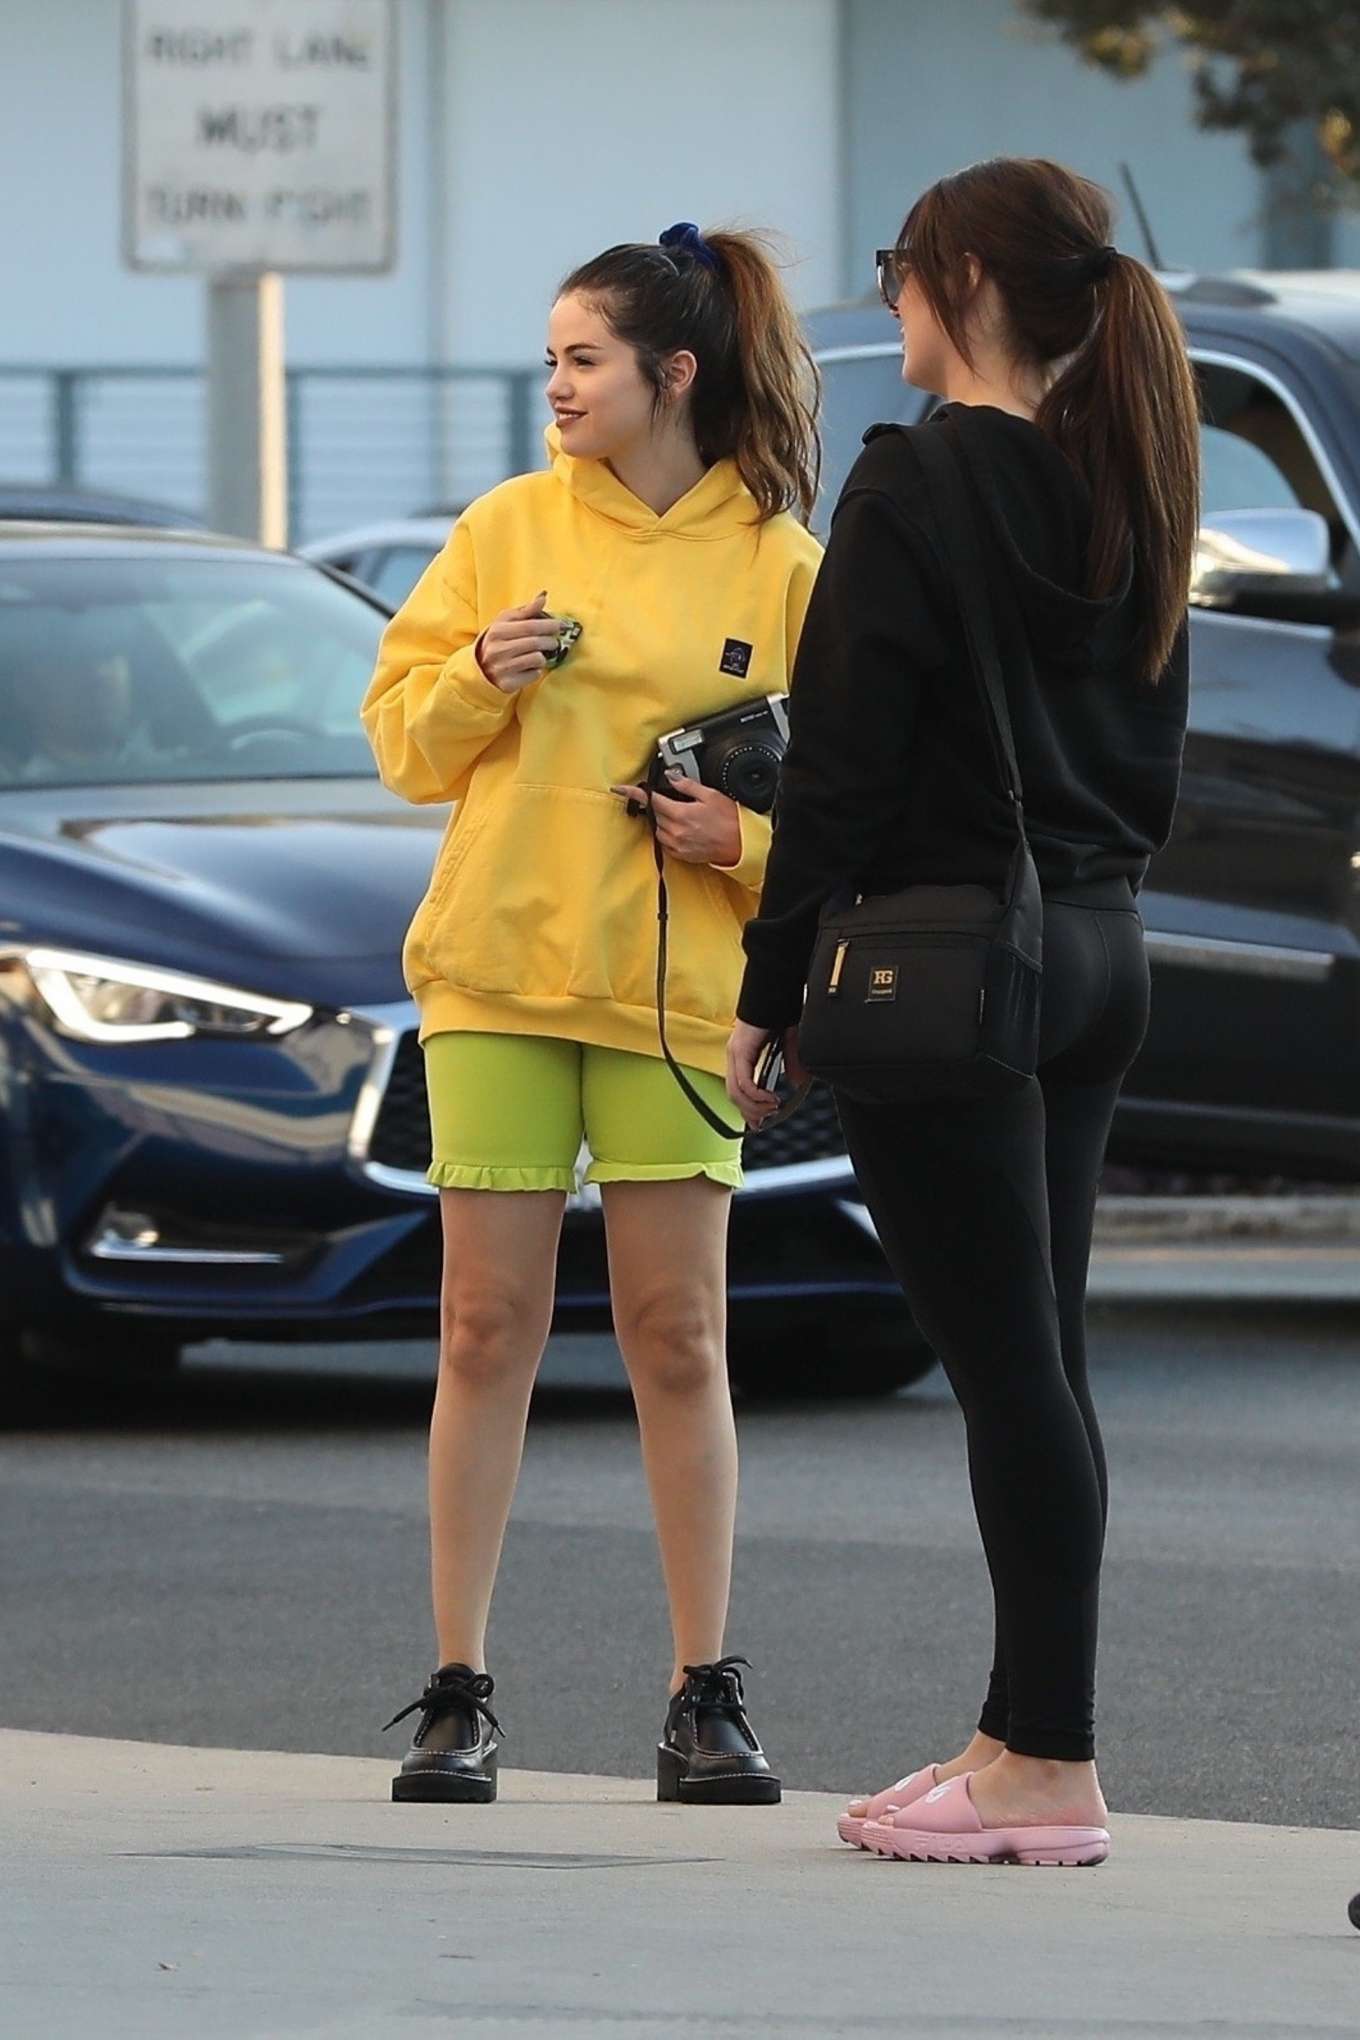 Selena Gomez 2019 : Selena Gomez – Shops with friends at Gelsons in Los Angeles-15